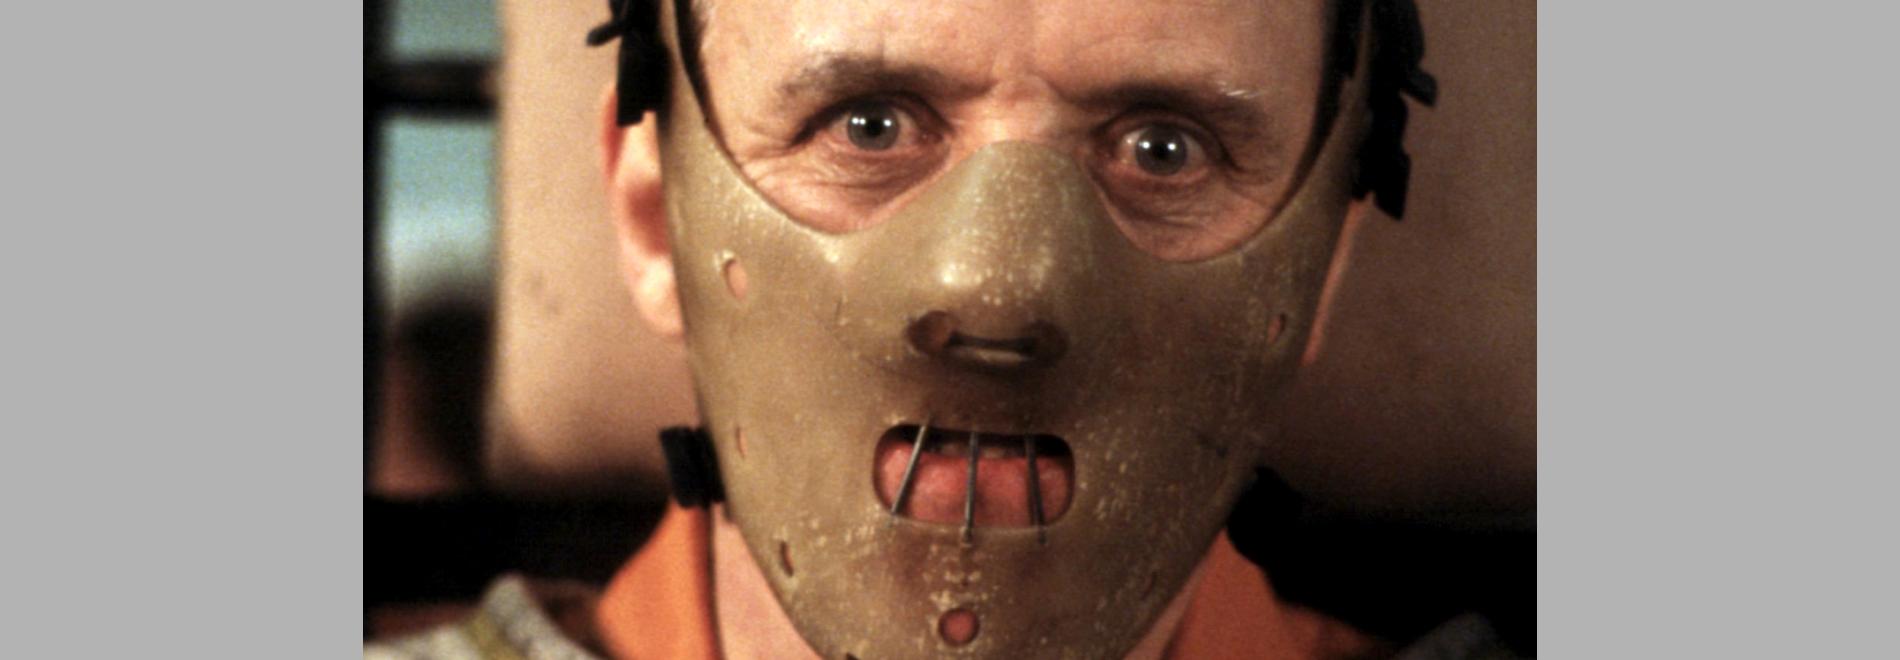 The Silence of the Lambs  (Jonathan Demme, 1990)